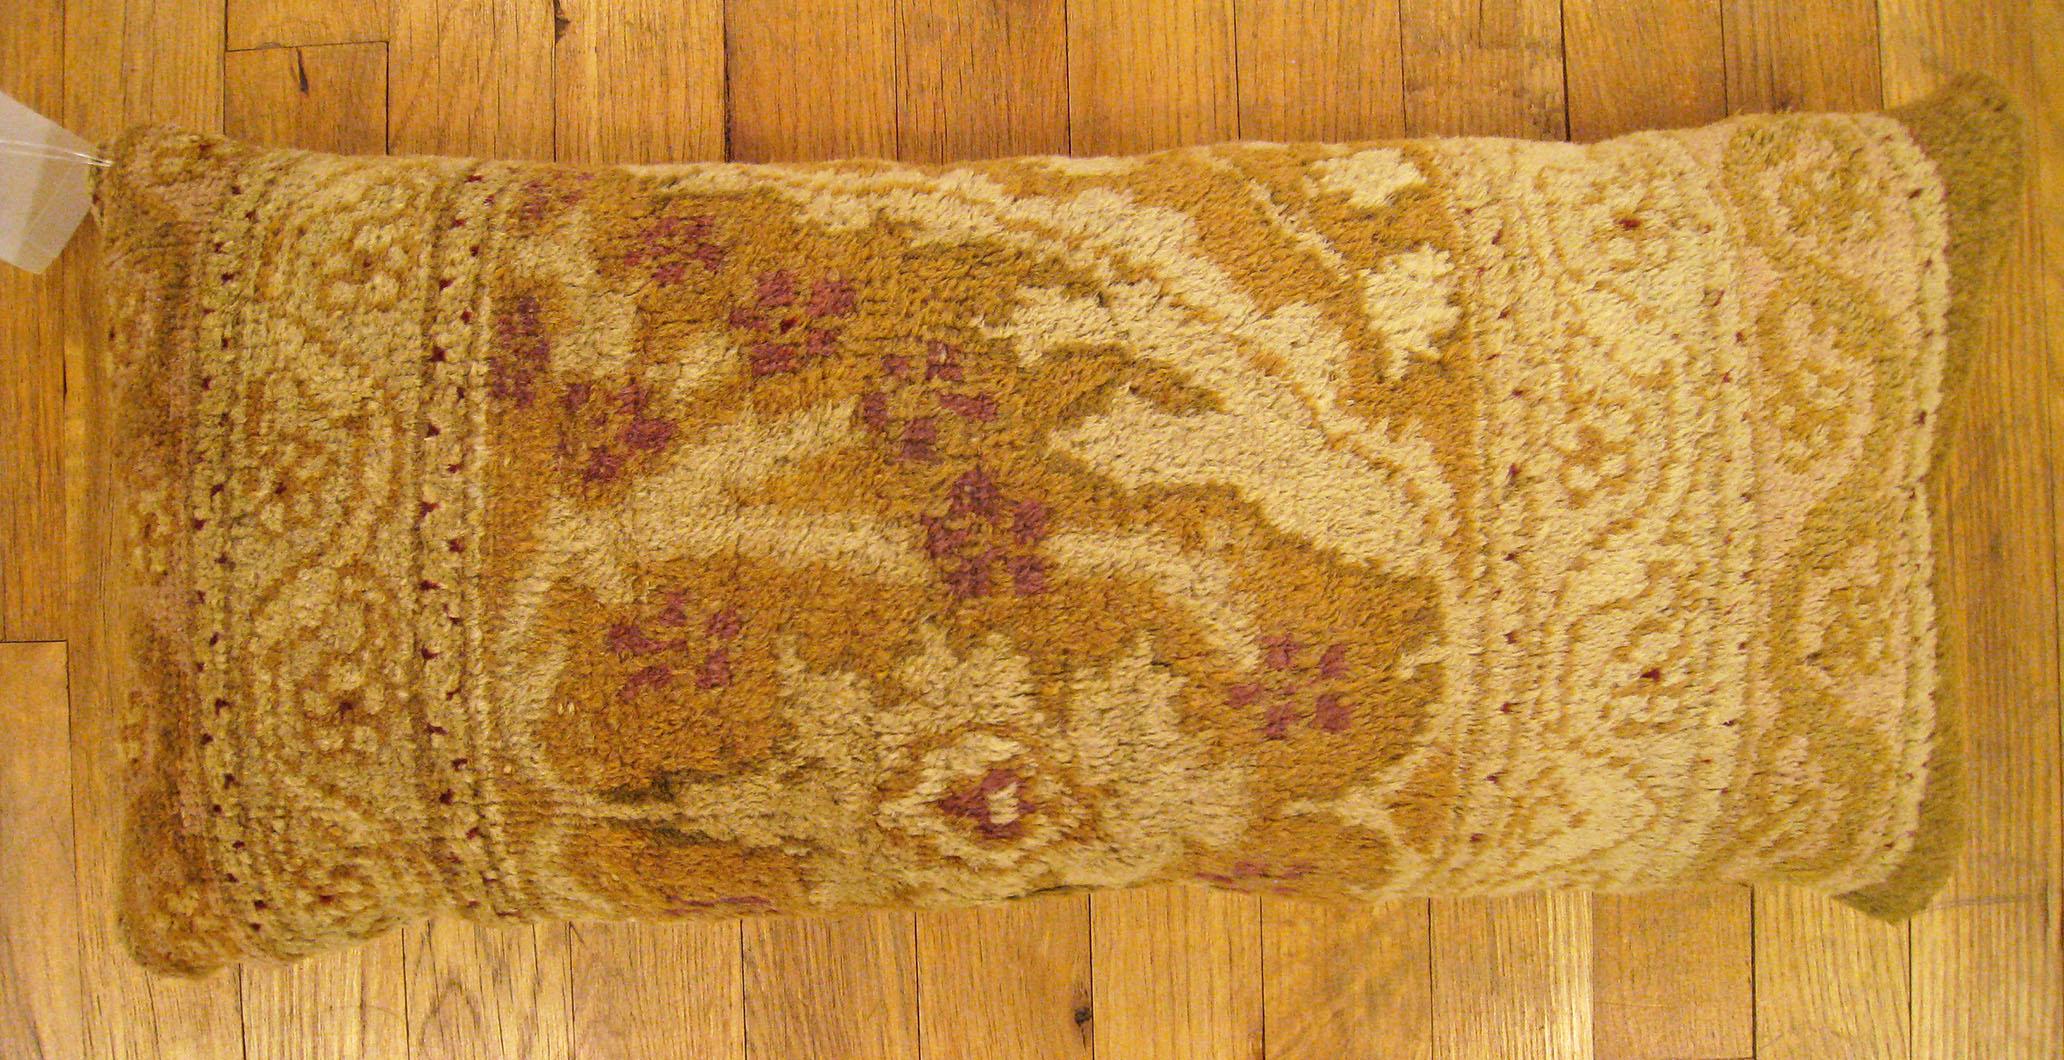 Antique Indian Agra rug pillow; size 2'0” x 1'0”.

An antique decorative pillow with floral elements allover a light brown central field, size 2'0” x 1'0”. This lovely decorative pillow features an antique fabric of a Agra carpet on front which is